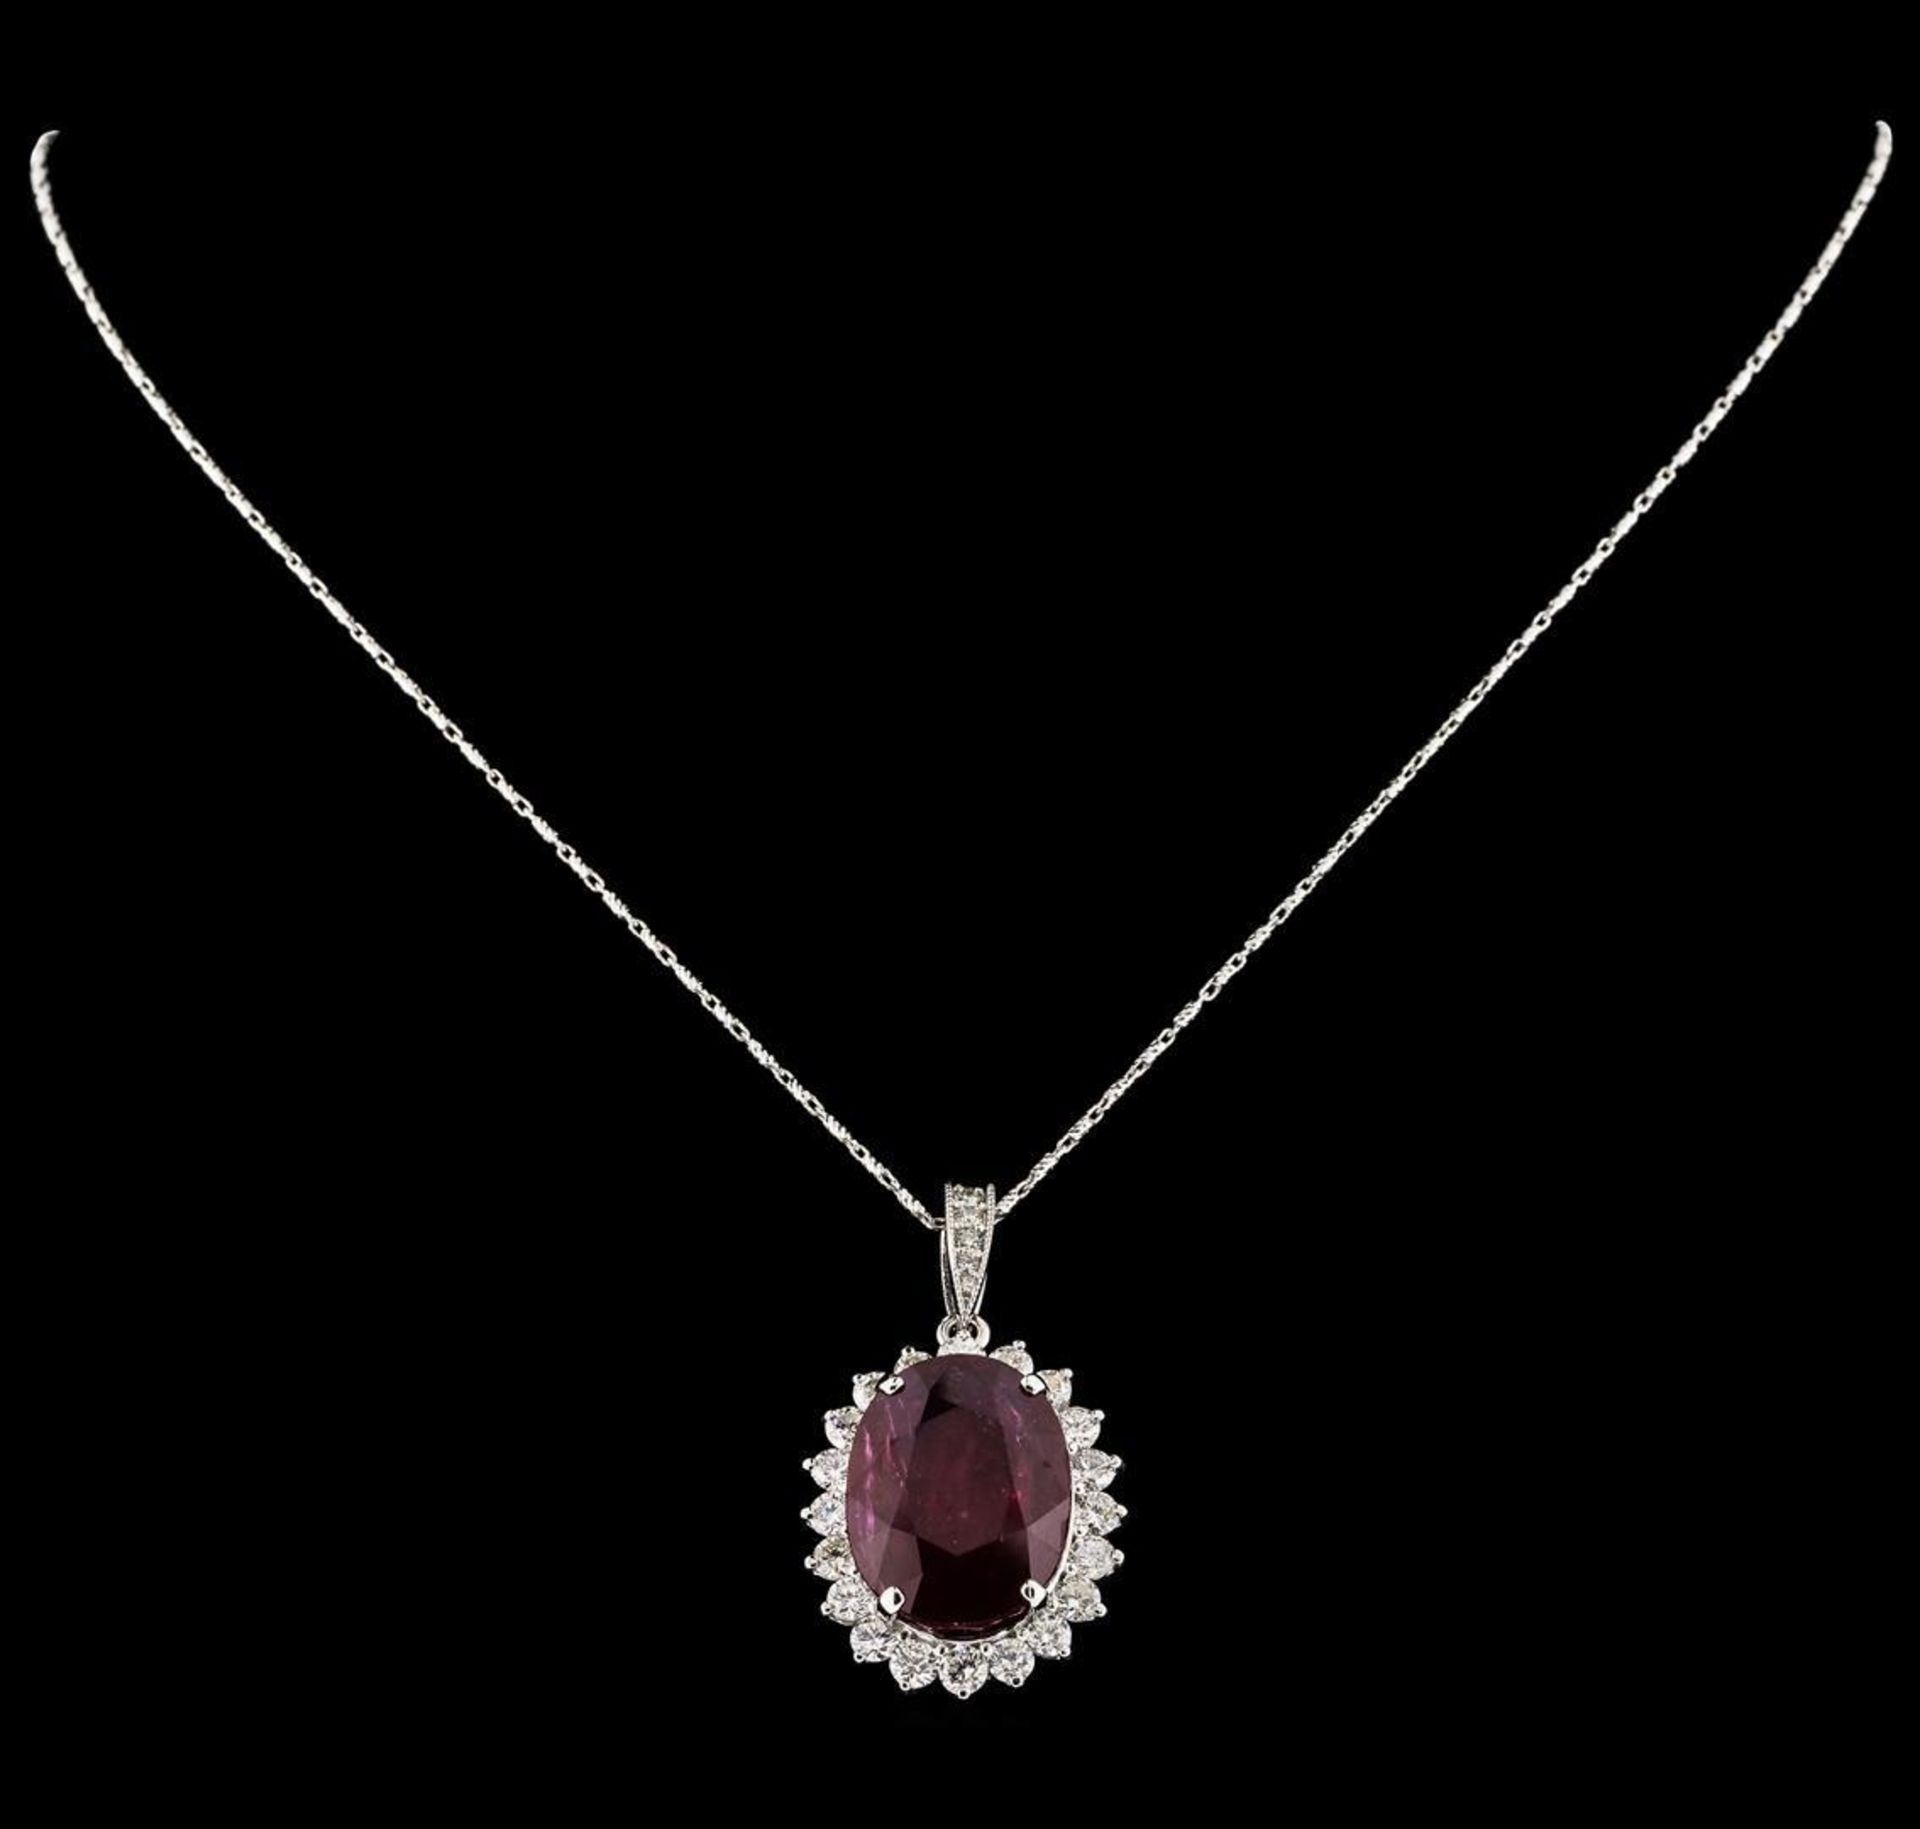 18.81 ctw Ruby and Diamond Pendant With Chain - 14KT White Gold - Image 2 of 6